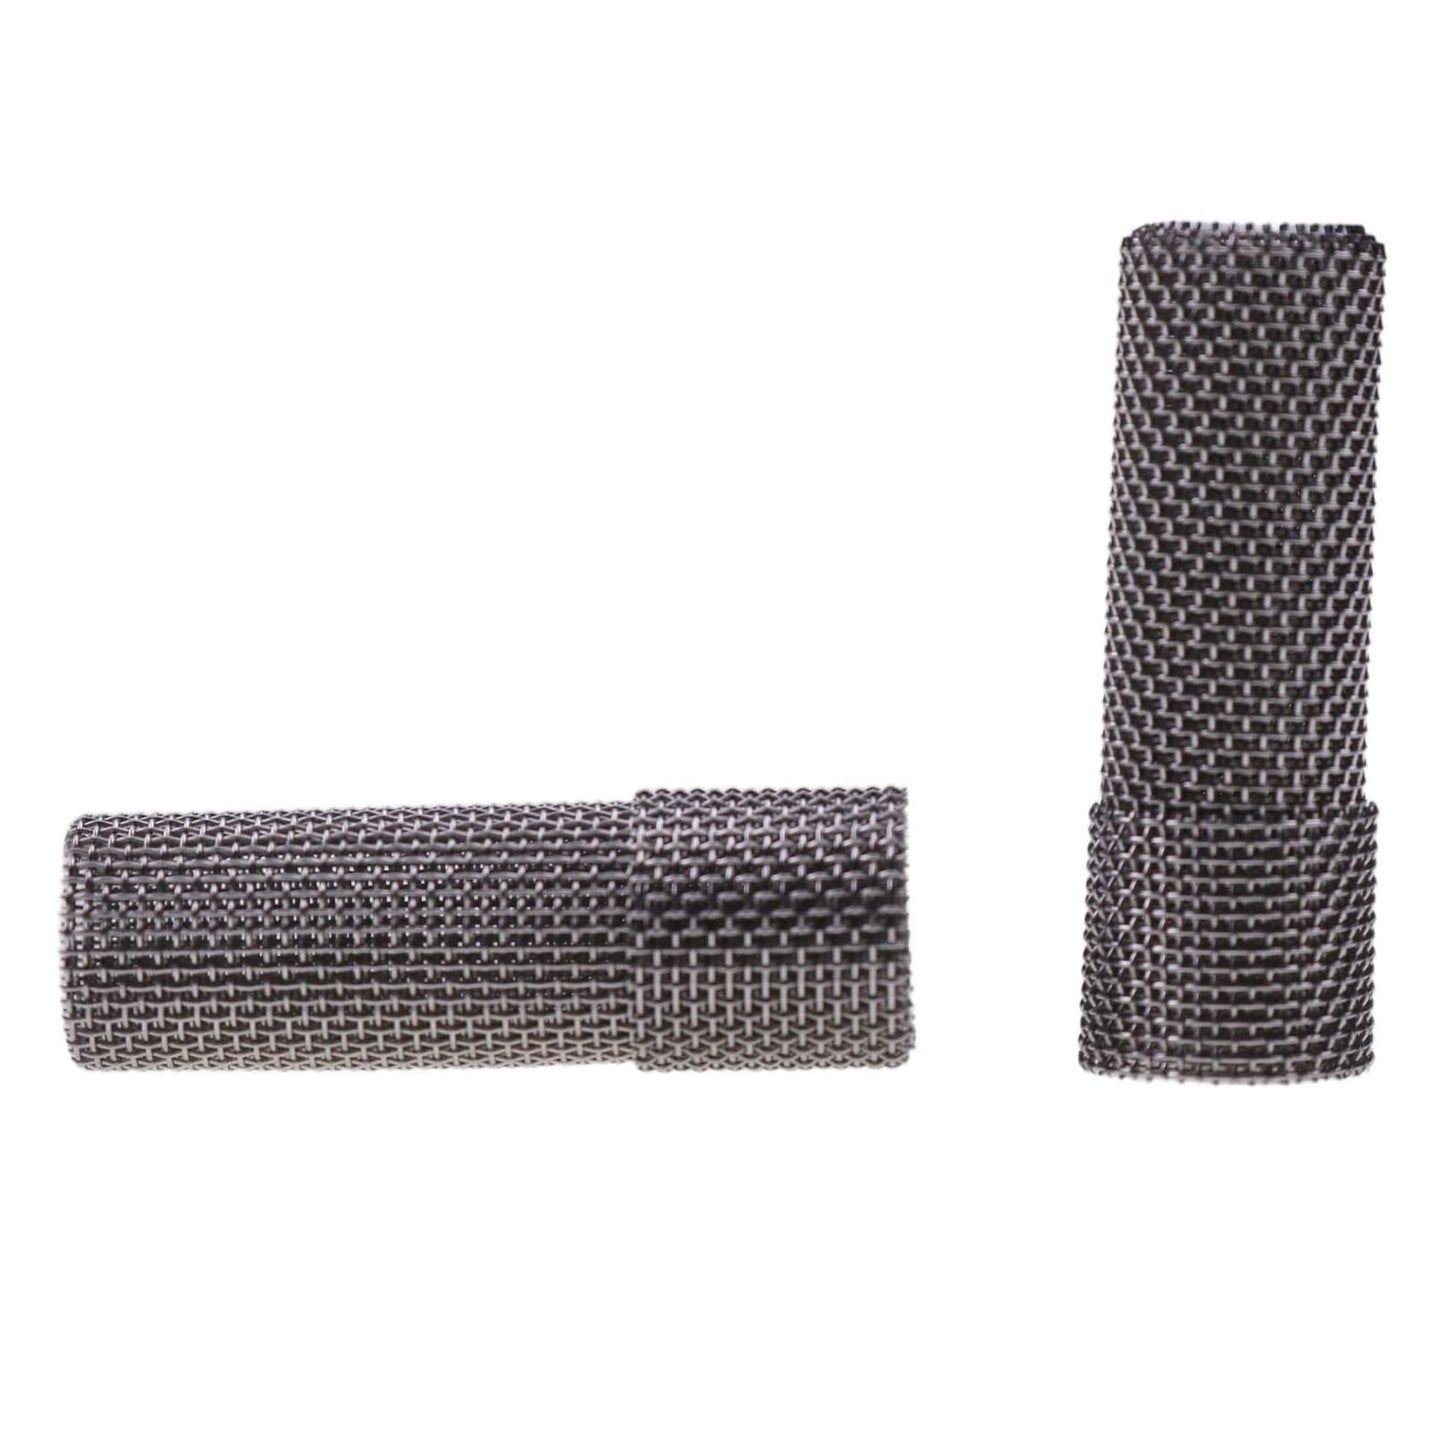 New 2X Stainless Steel Glow Plug Mesh Filter Strainer Screen 252121990113 Compatible with Eberspacher Hydronic Heater D4 D5 D4W D5W 12V 24V